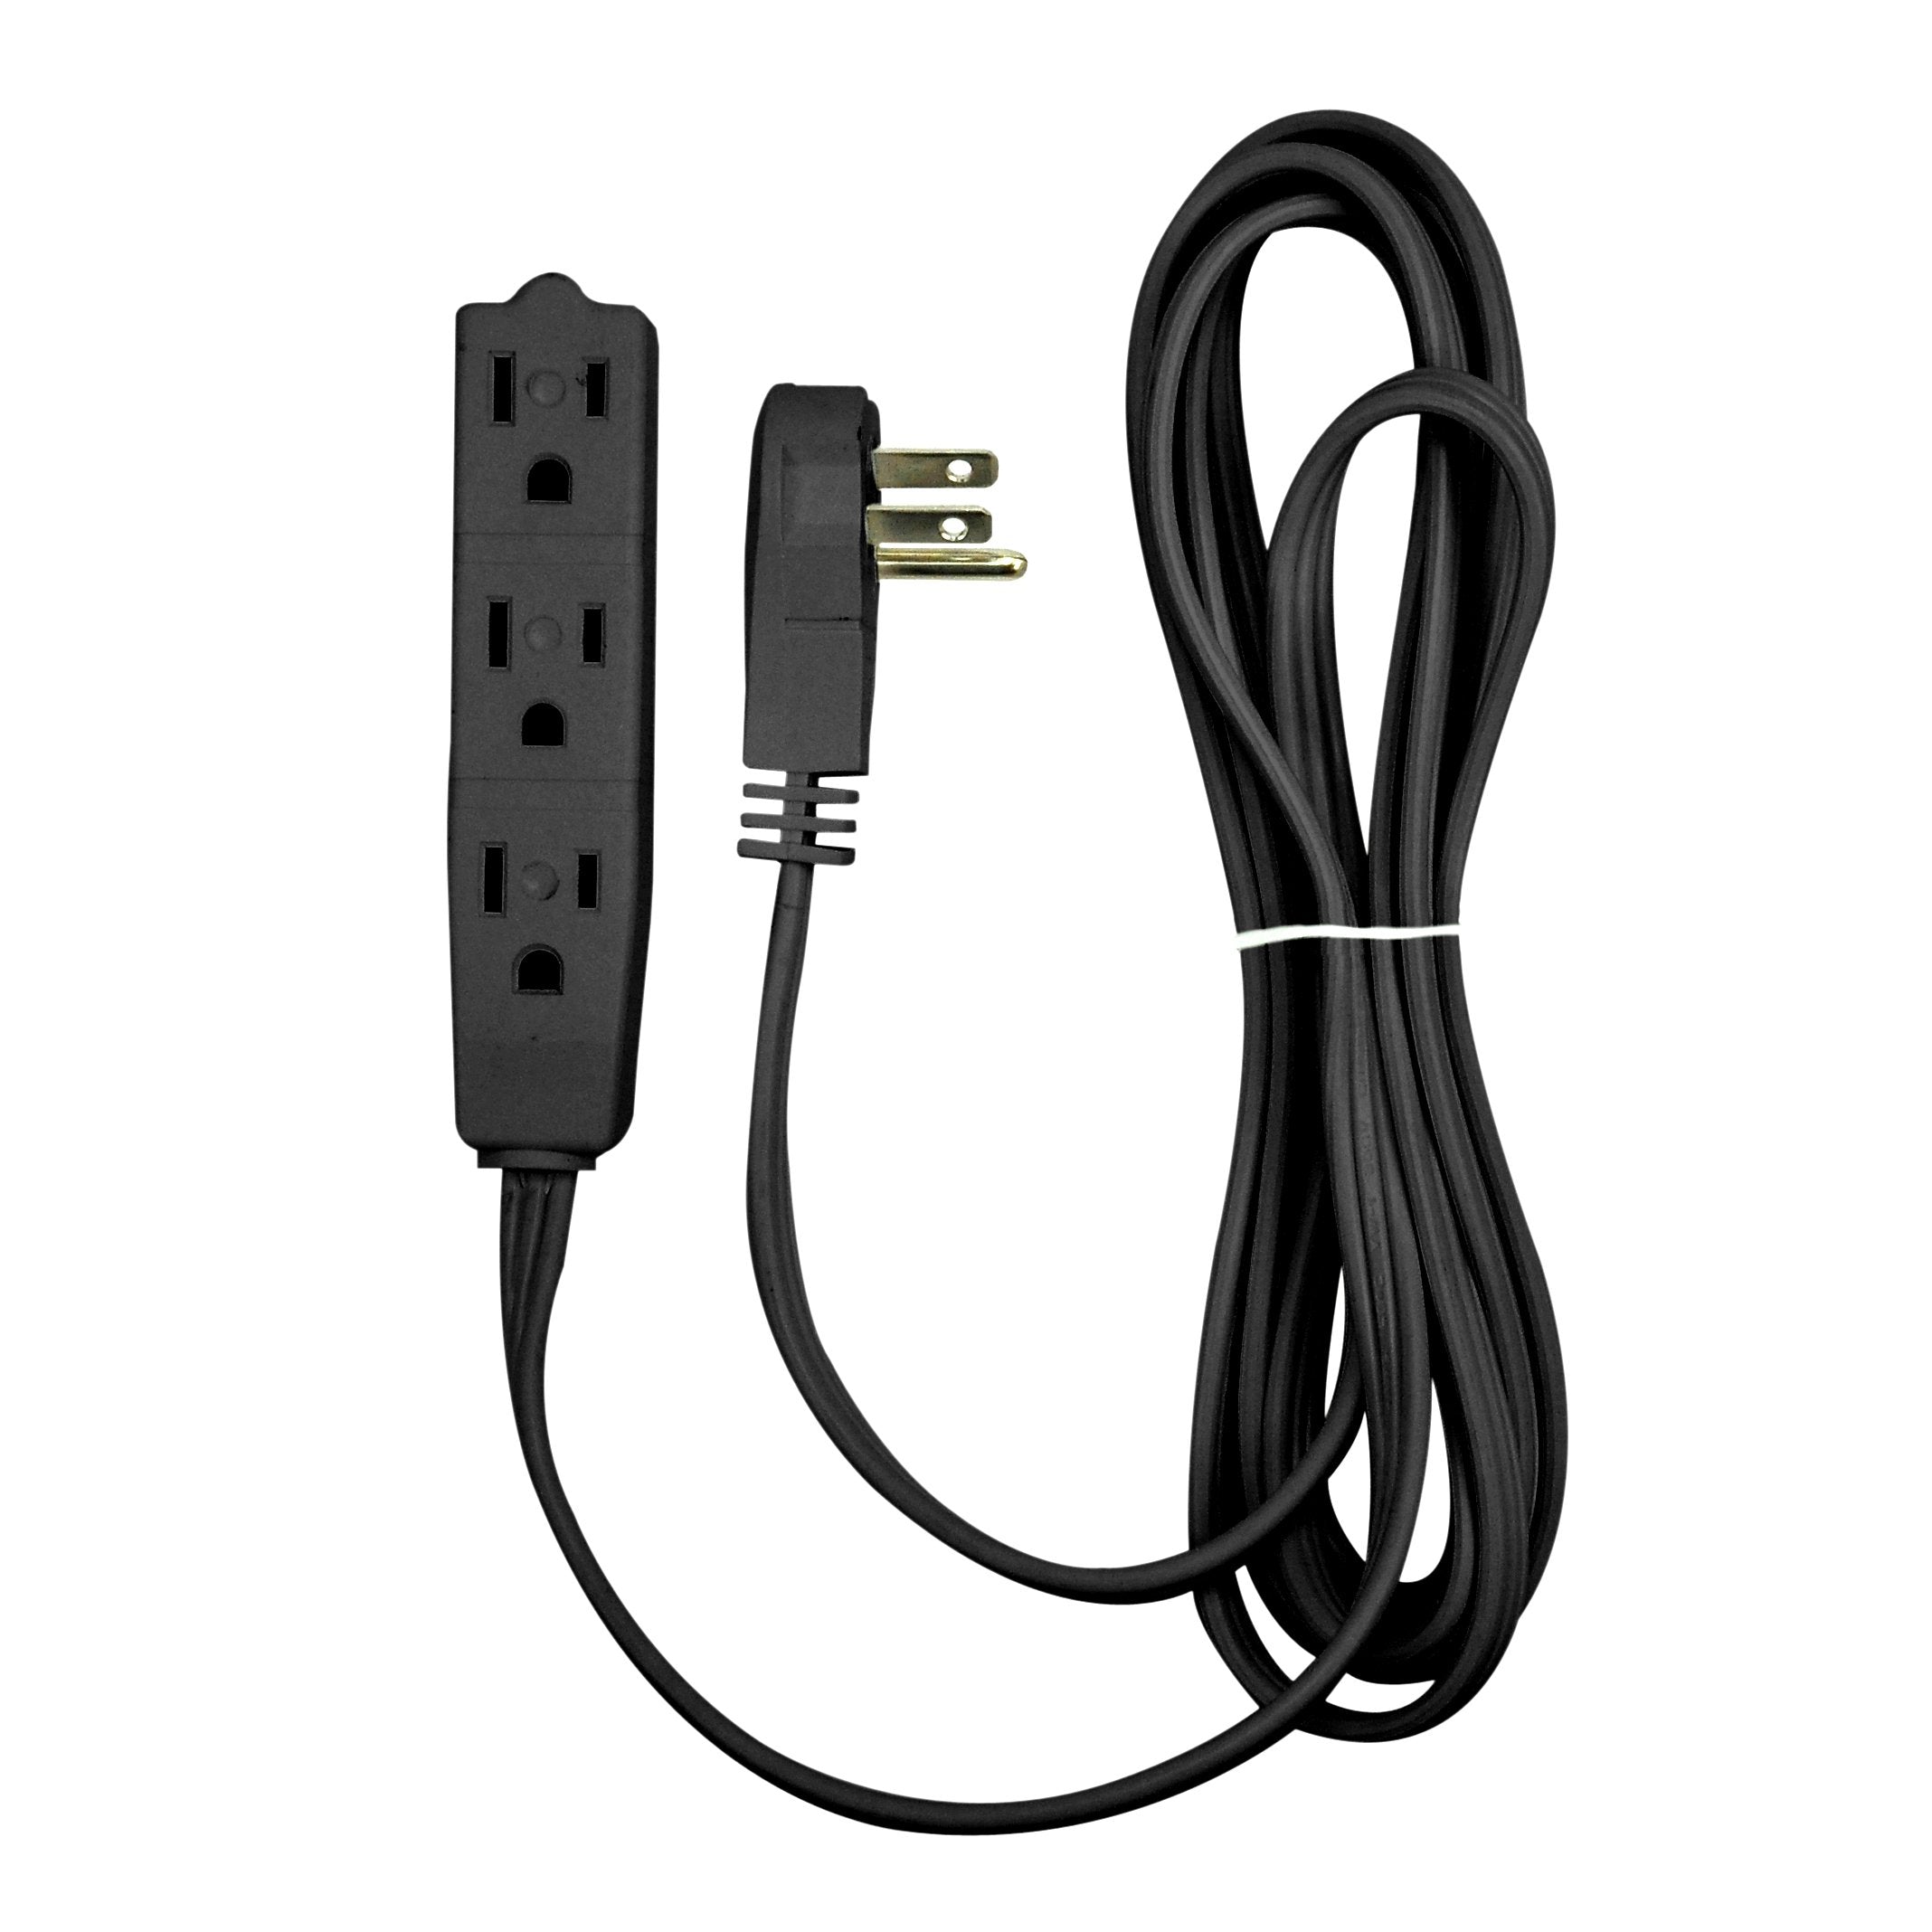 Flat Multiple Outlet Extension Cord for Indoor Use by Bindmaster- UL-Listed 3-Prong Multi Extension Wire- Space-Saving Flat Angled Extension Cord- Black  - Acceptable